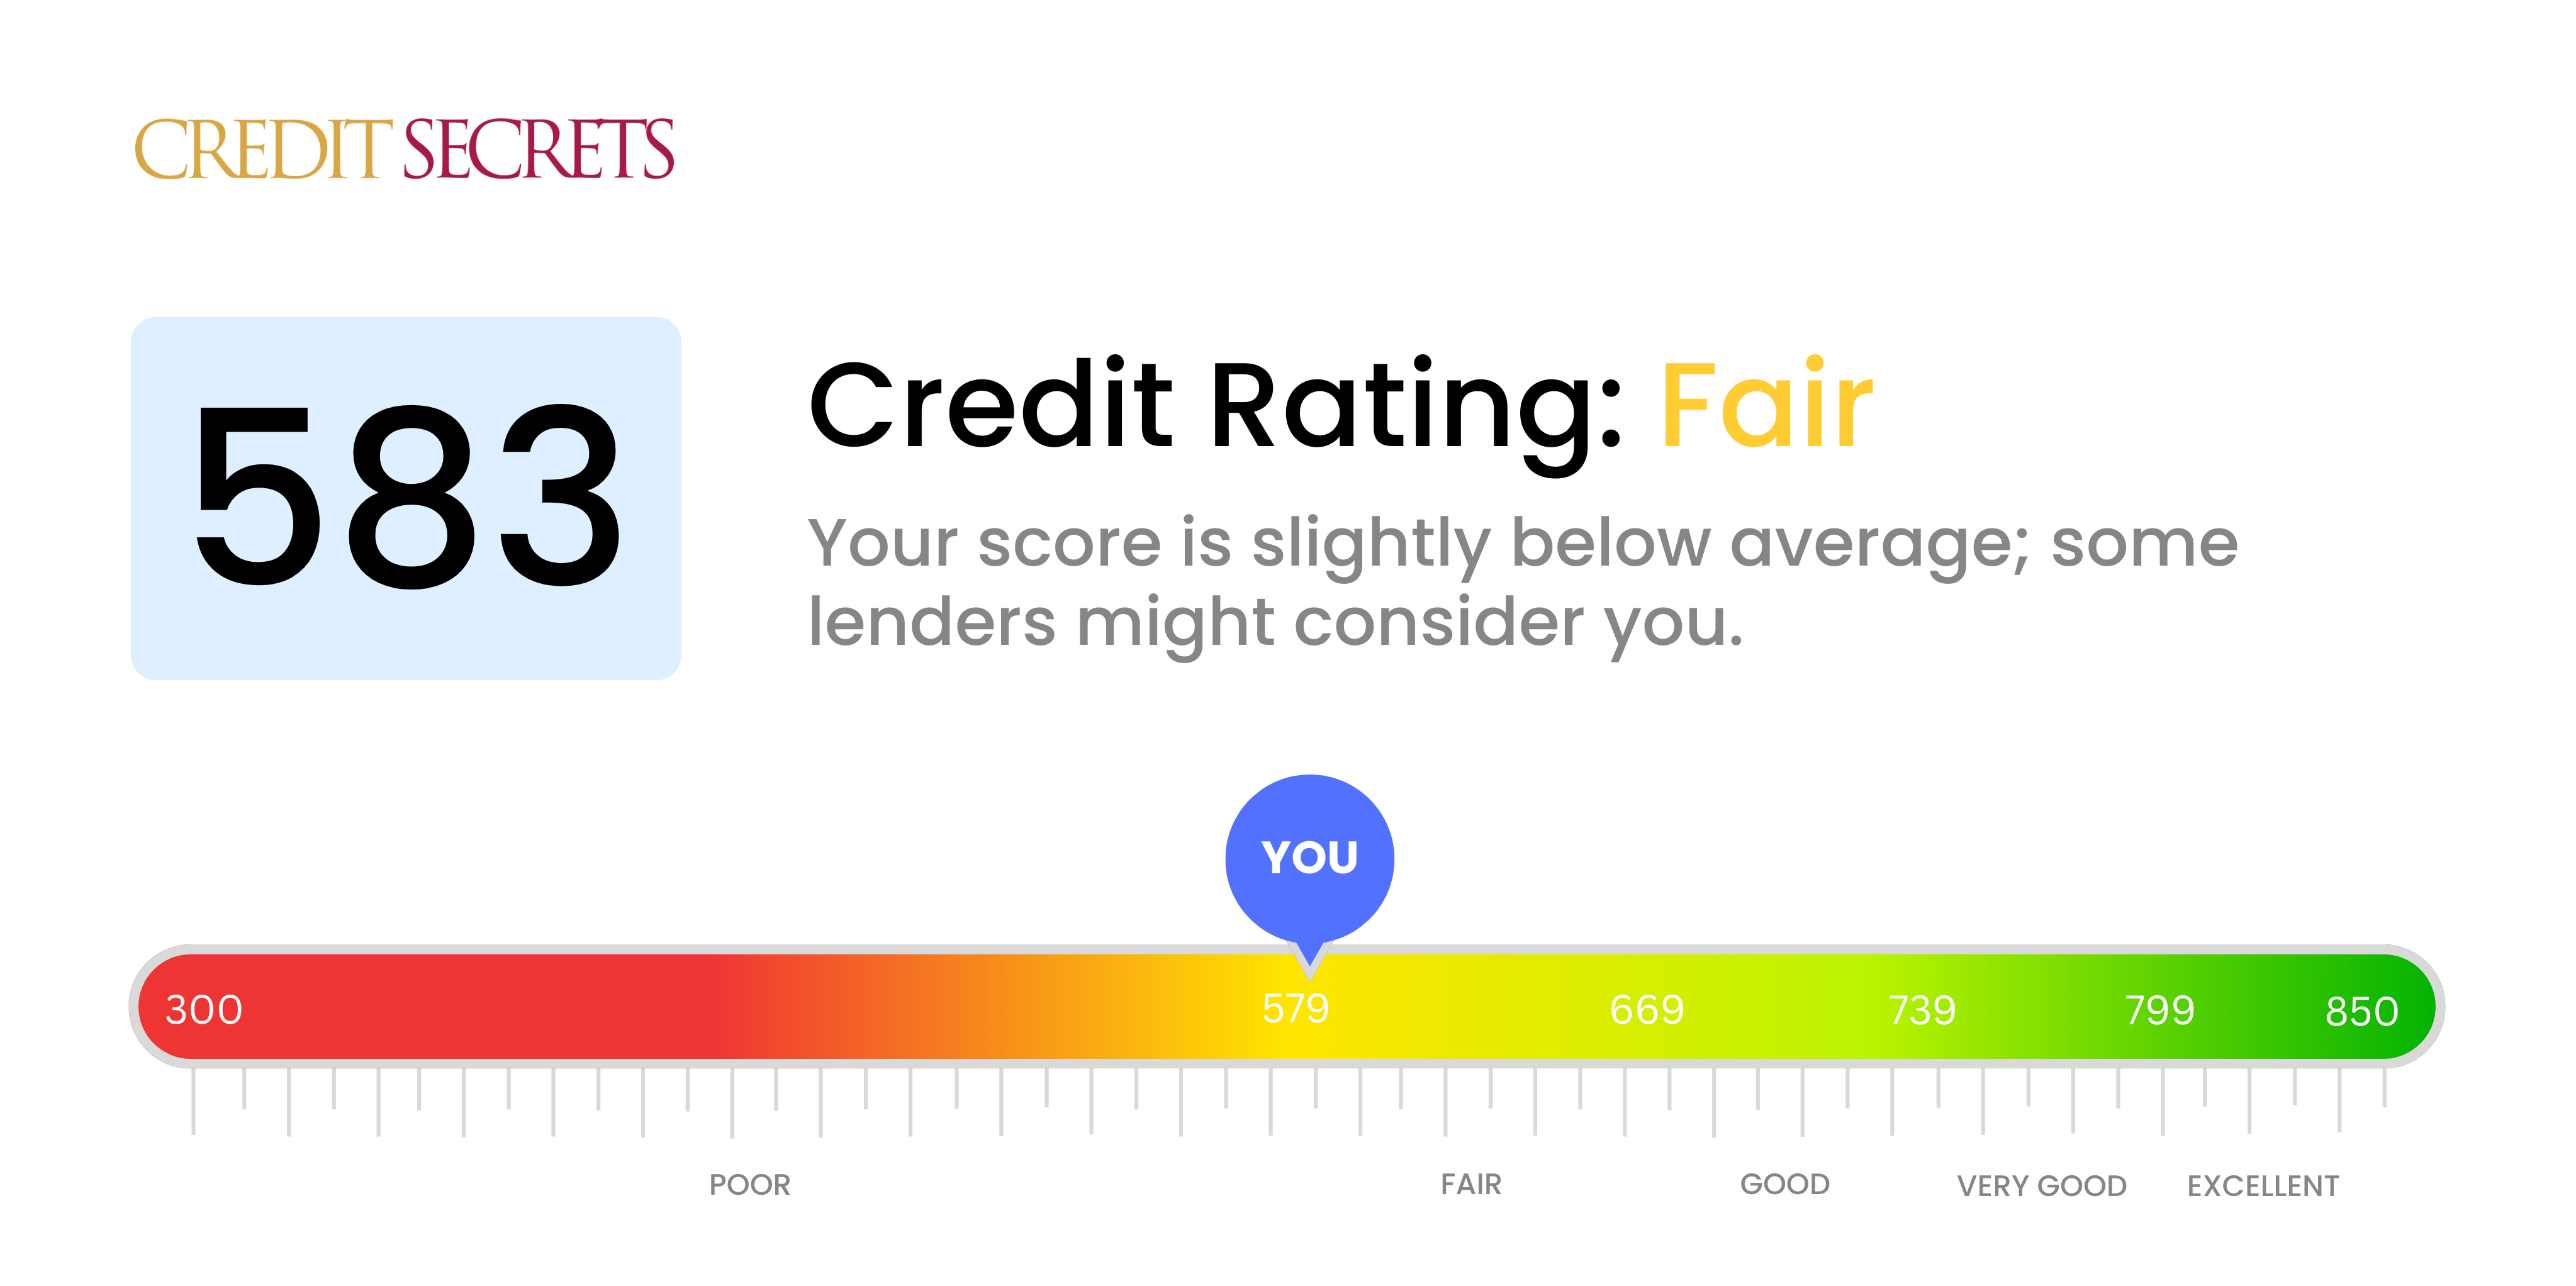 Is 583 a good credit score?